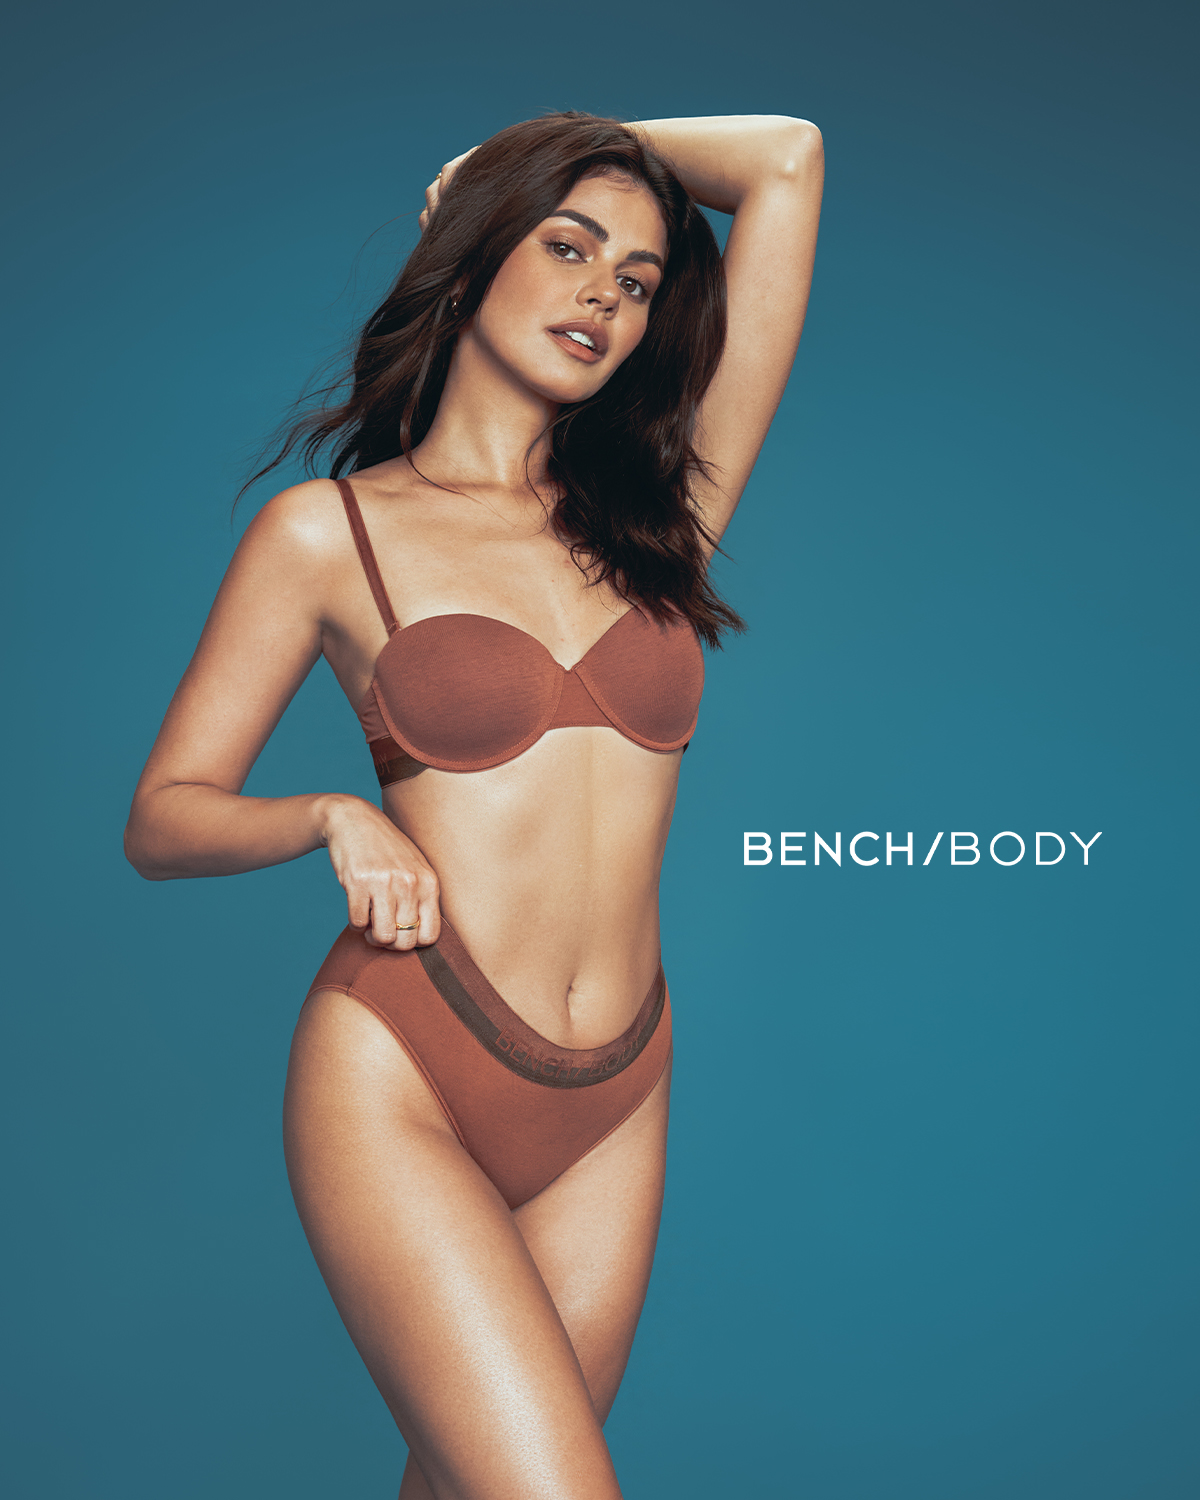 BENCH/ on X: Feel great knowing you are wearing eco-friendly underwear  that doesn't compromise on style or comfort. This new set of Bench Body  Envi Underwear is made with sustainable bamboo fabric